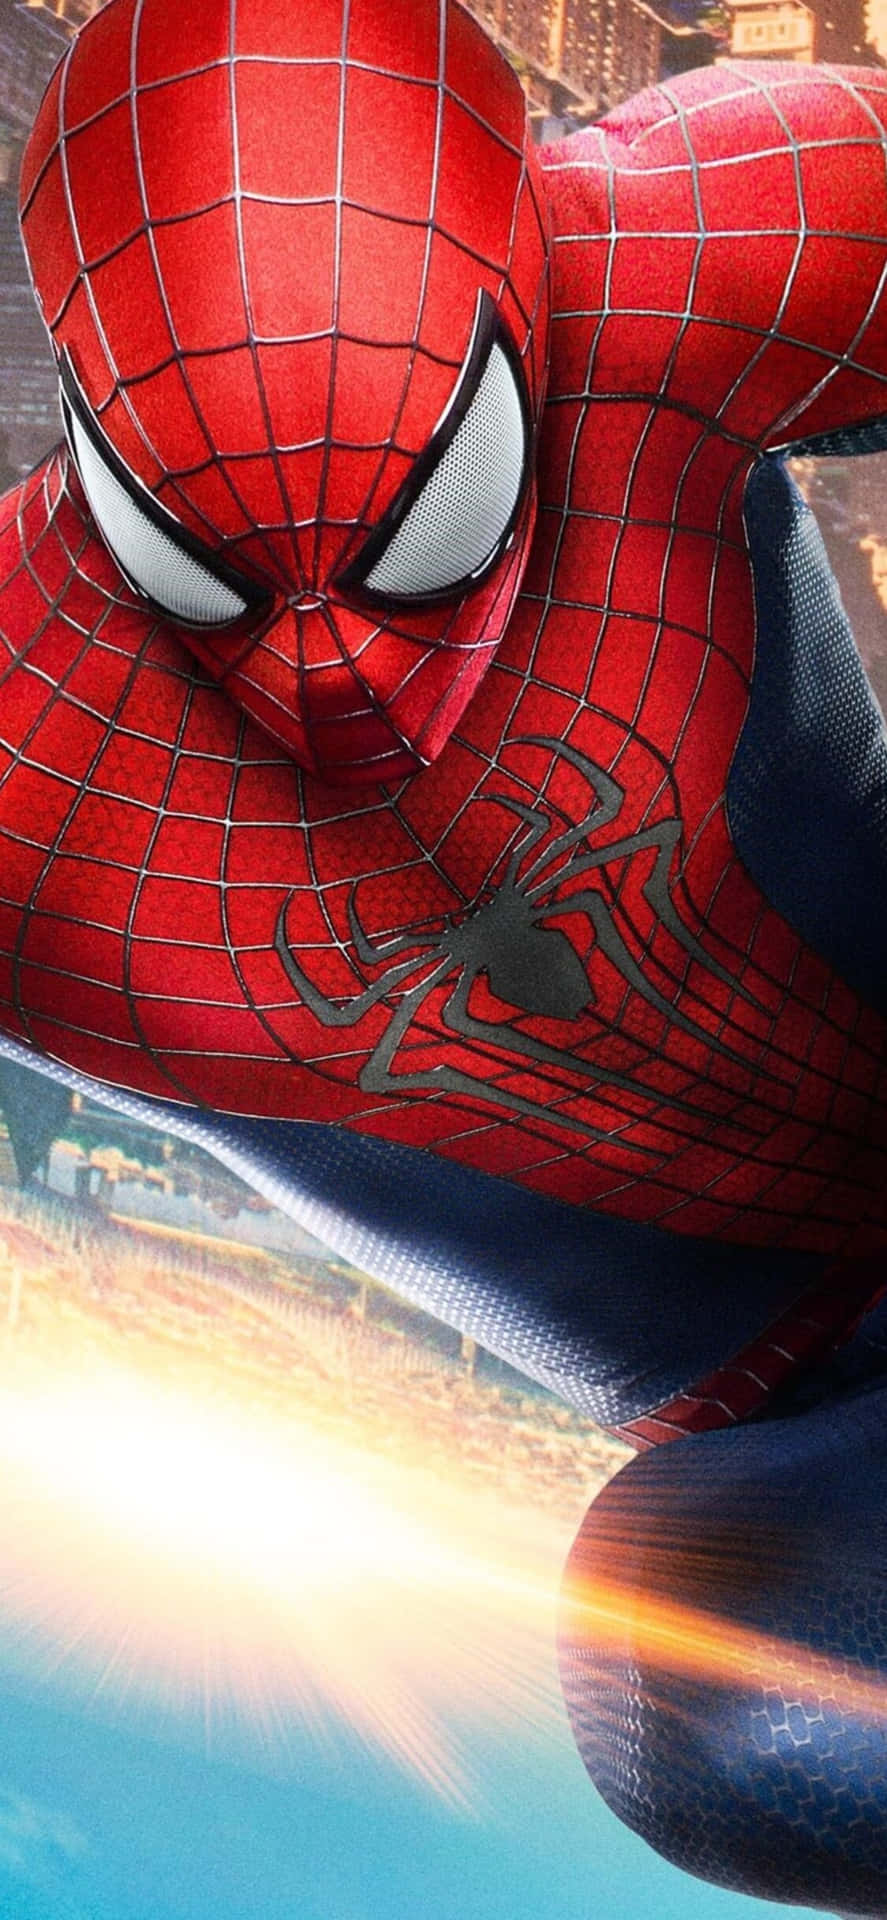 Get ready to swing through the city with the Amazing Spider Man on your new iPhone! Wallpaper